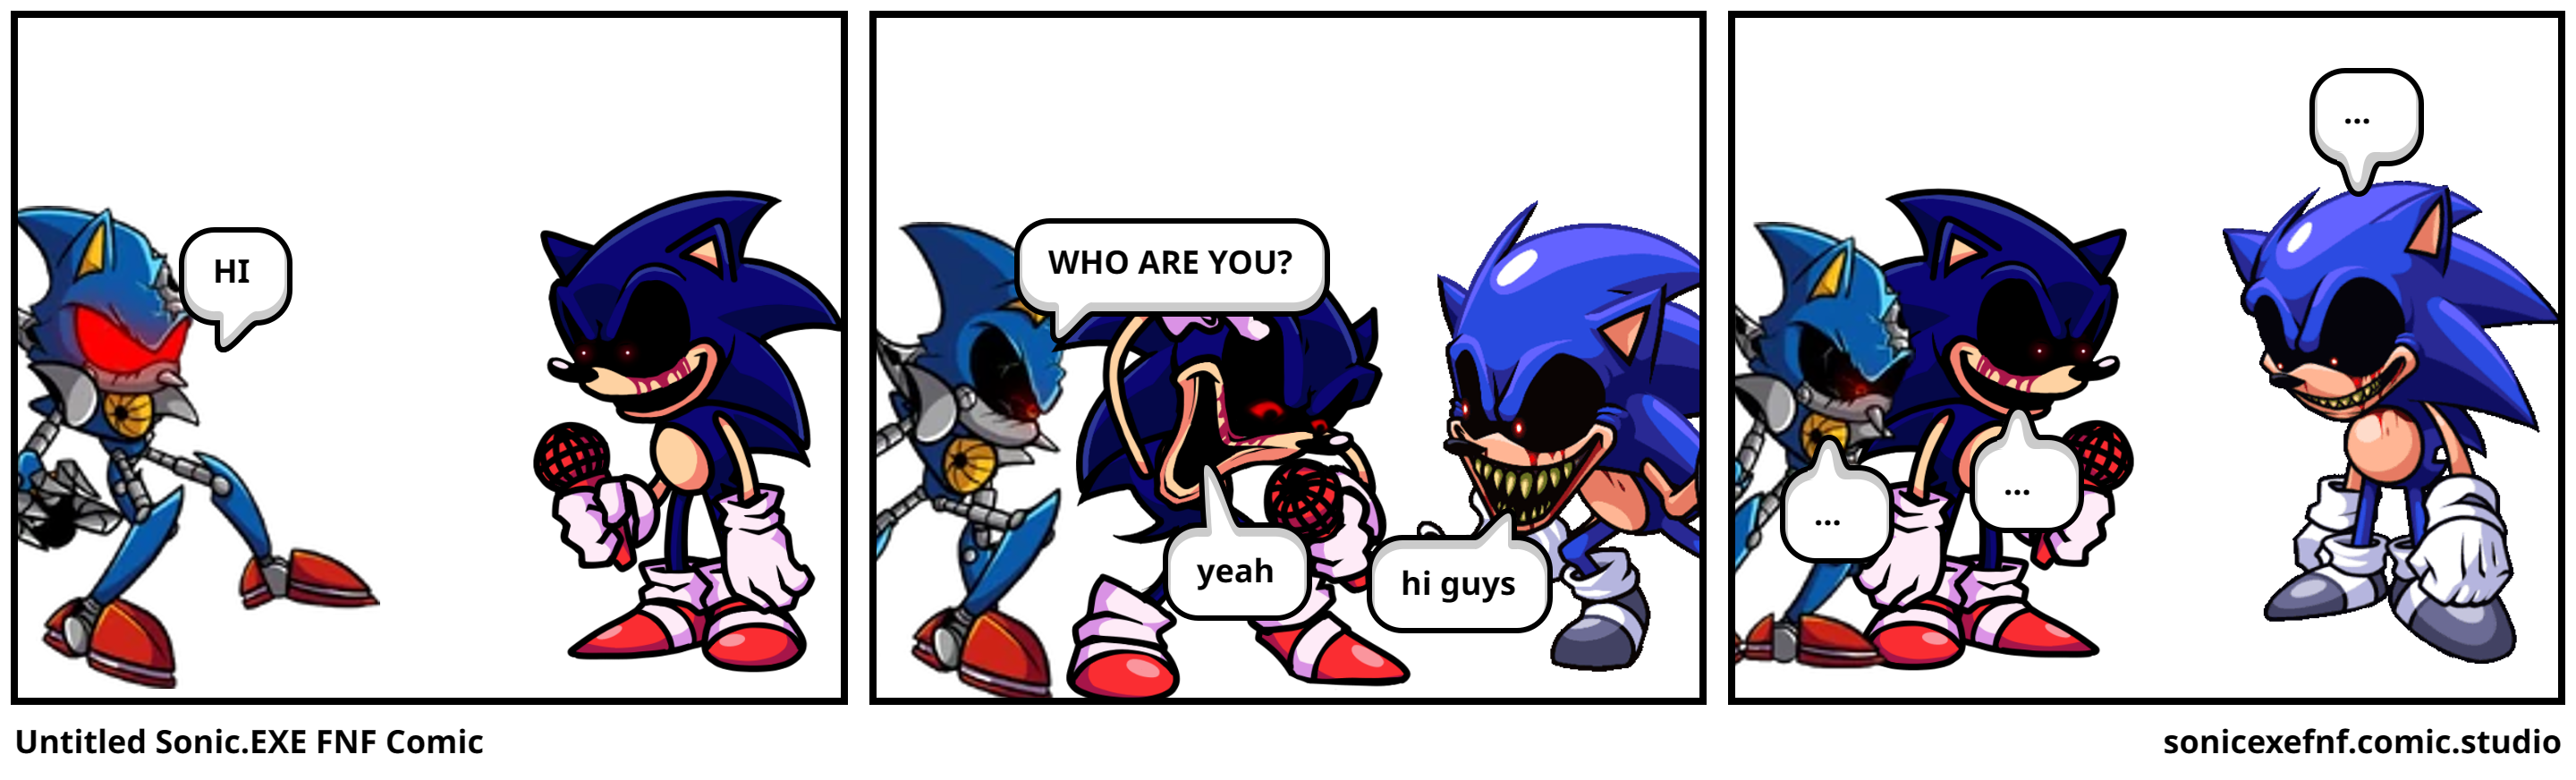 Untitled Sonic.EXE FNF Comic